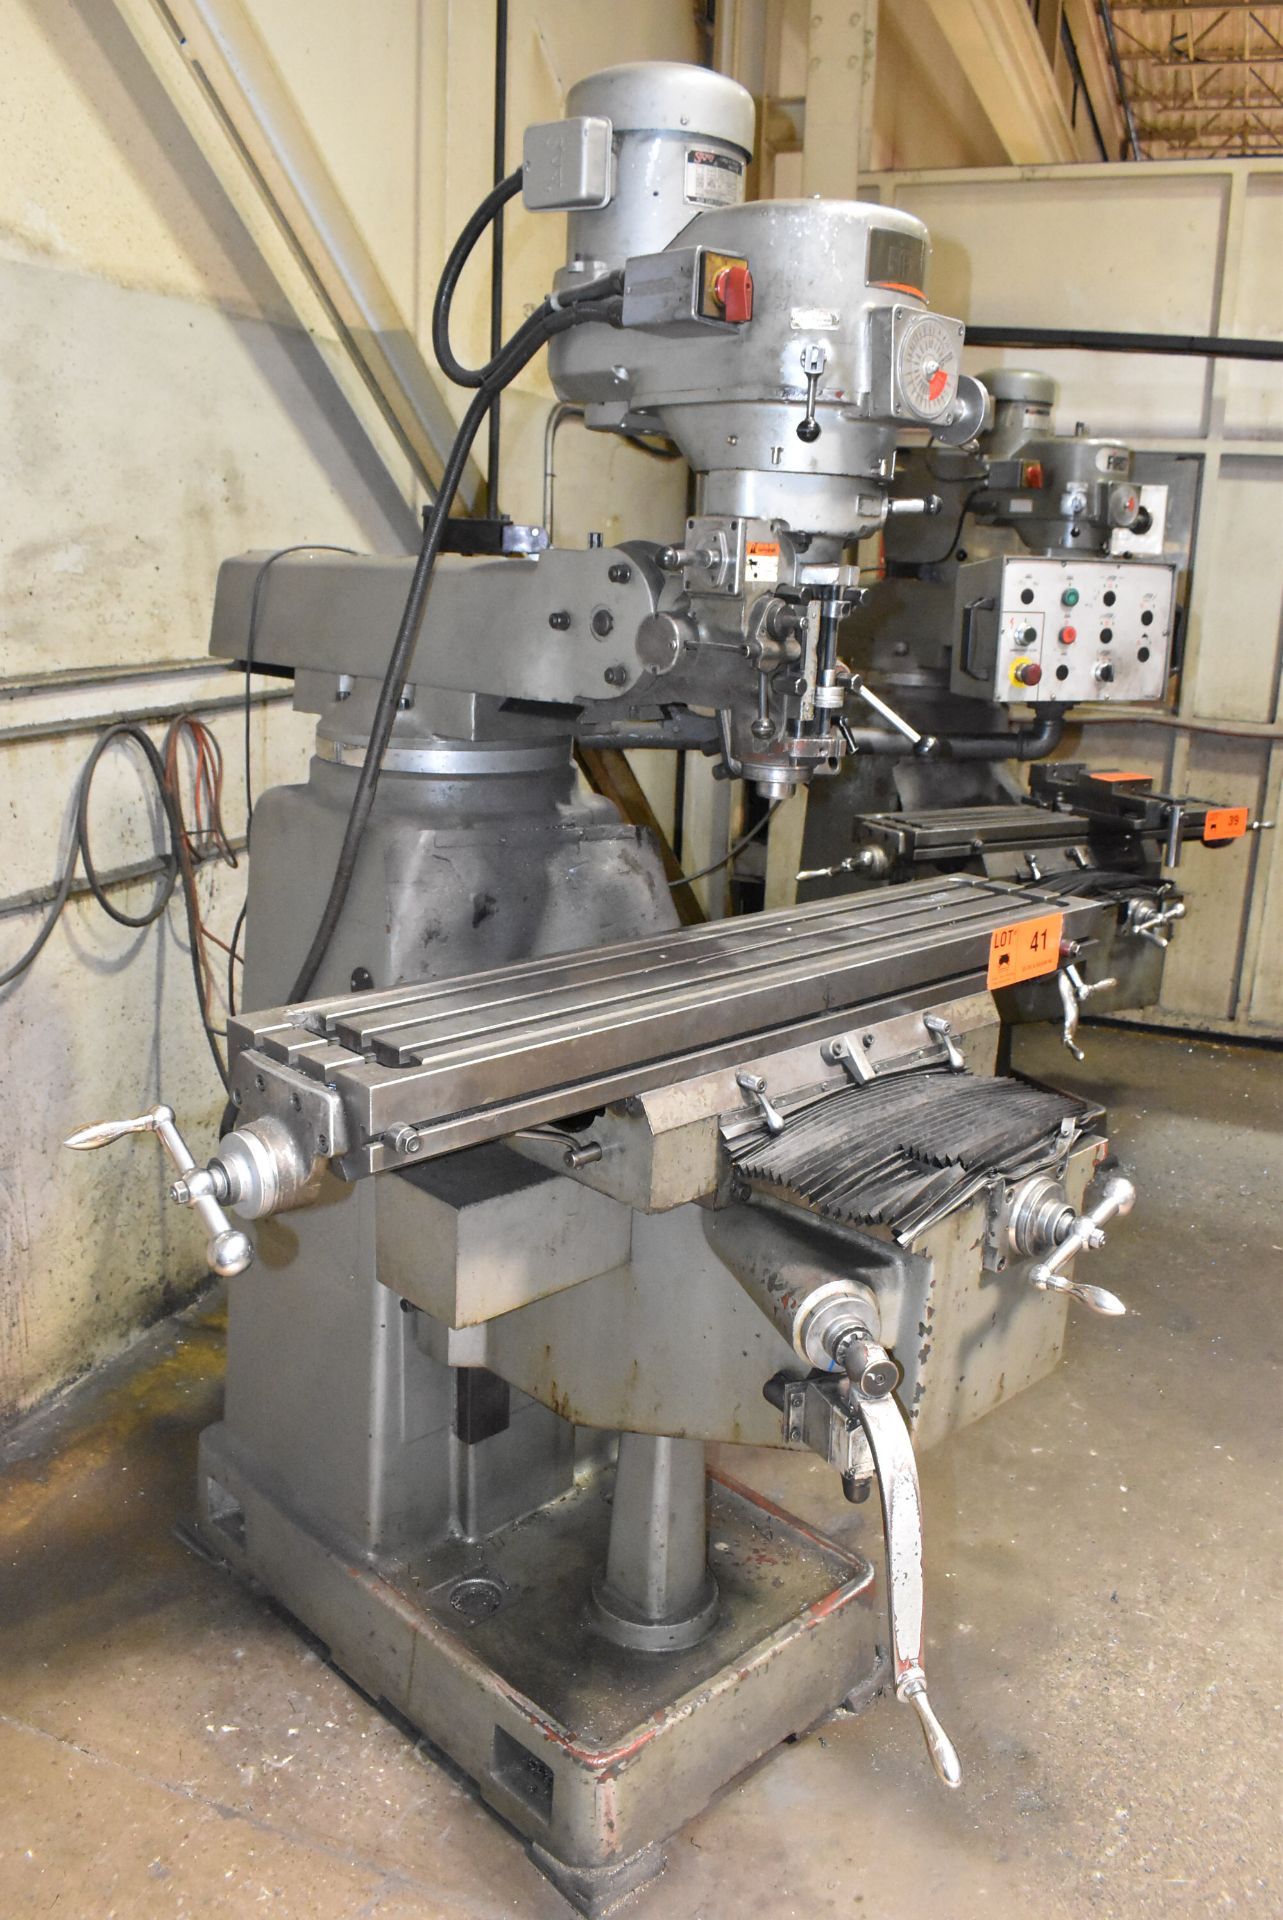 FIRST LC-185VS-B VERTICAL MILLING MACHINE WITH 50"X10" TABLE, SPEEDS TO 4500 RPM, HEIDENHAIN 2- - Image 8 of 8